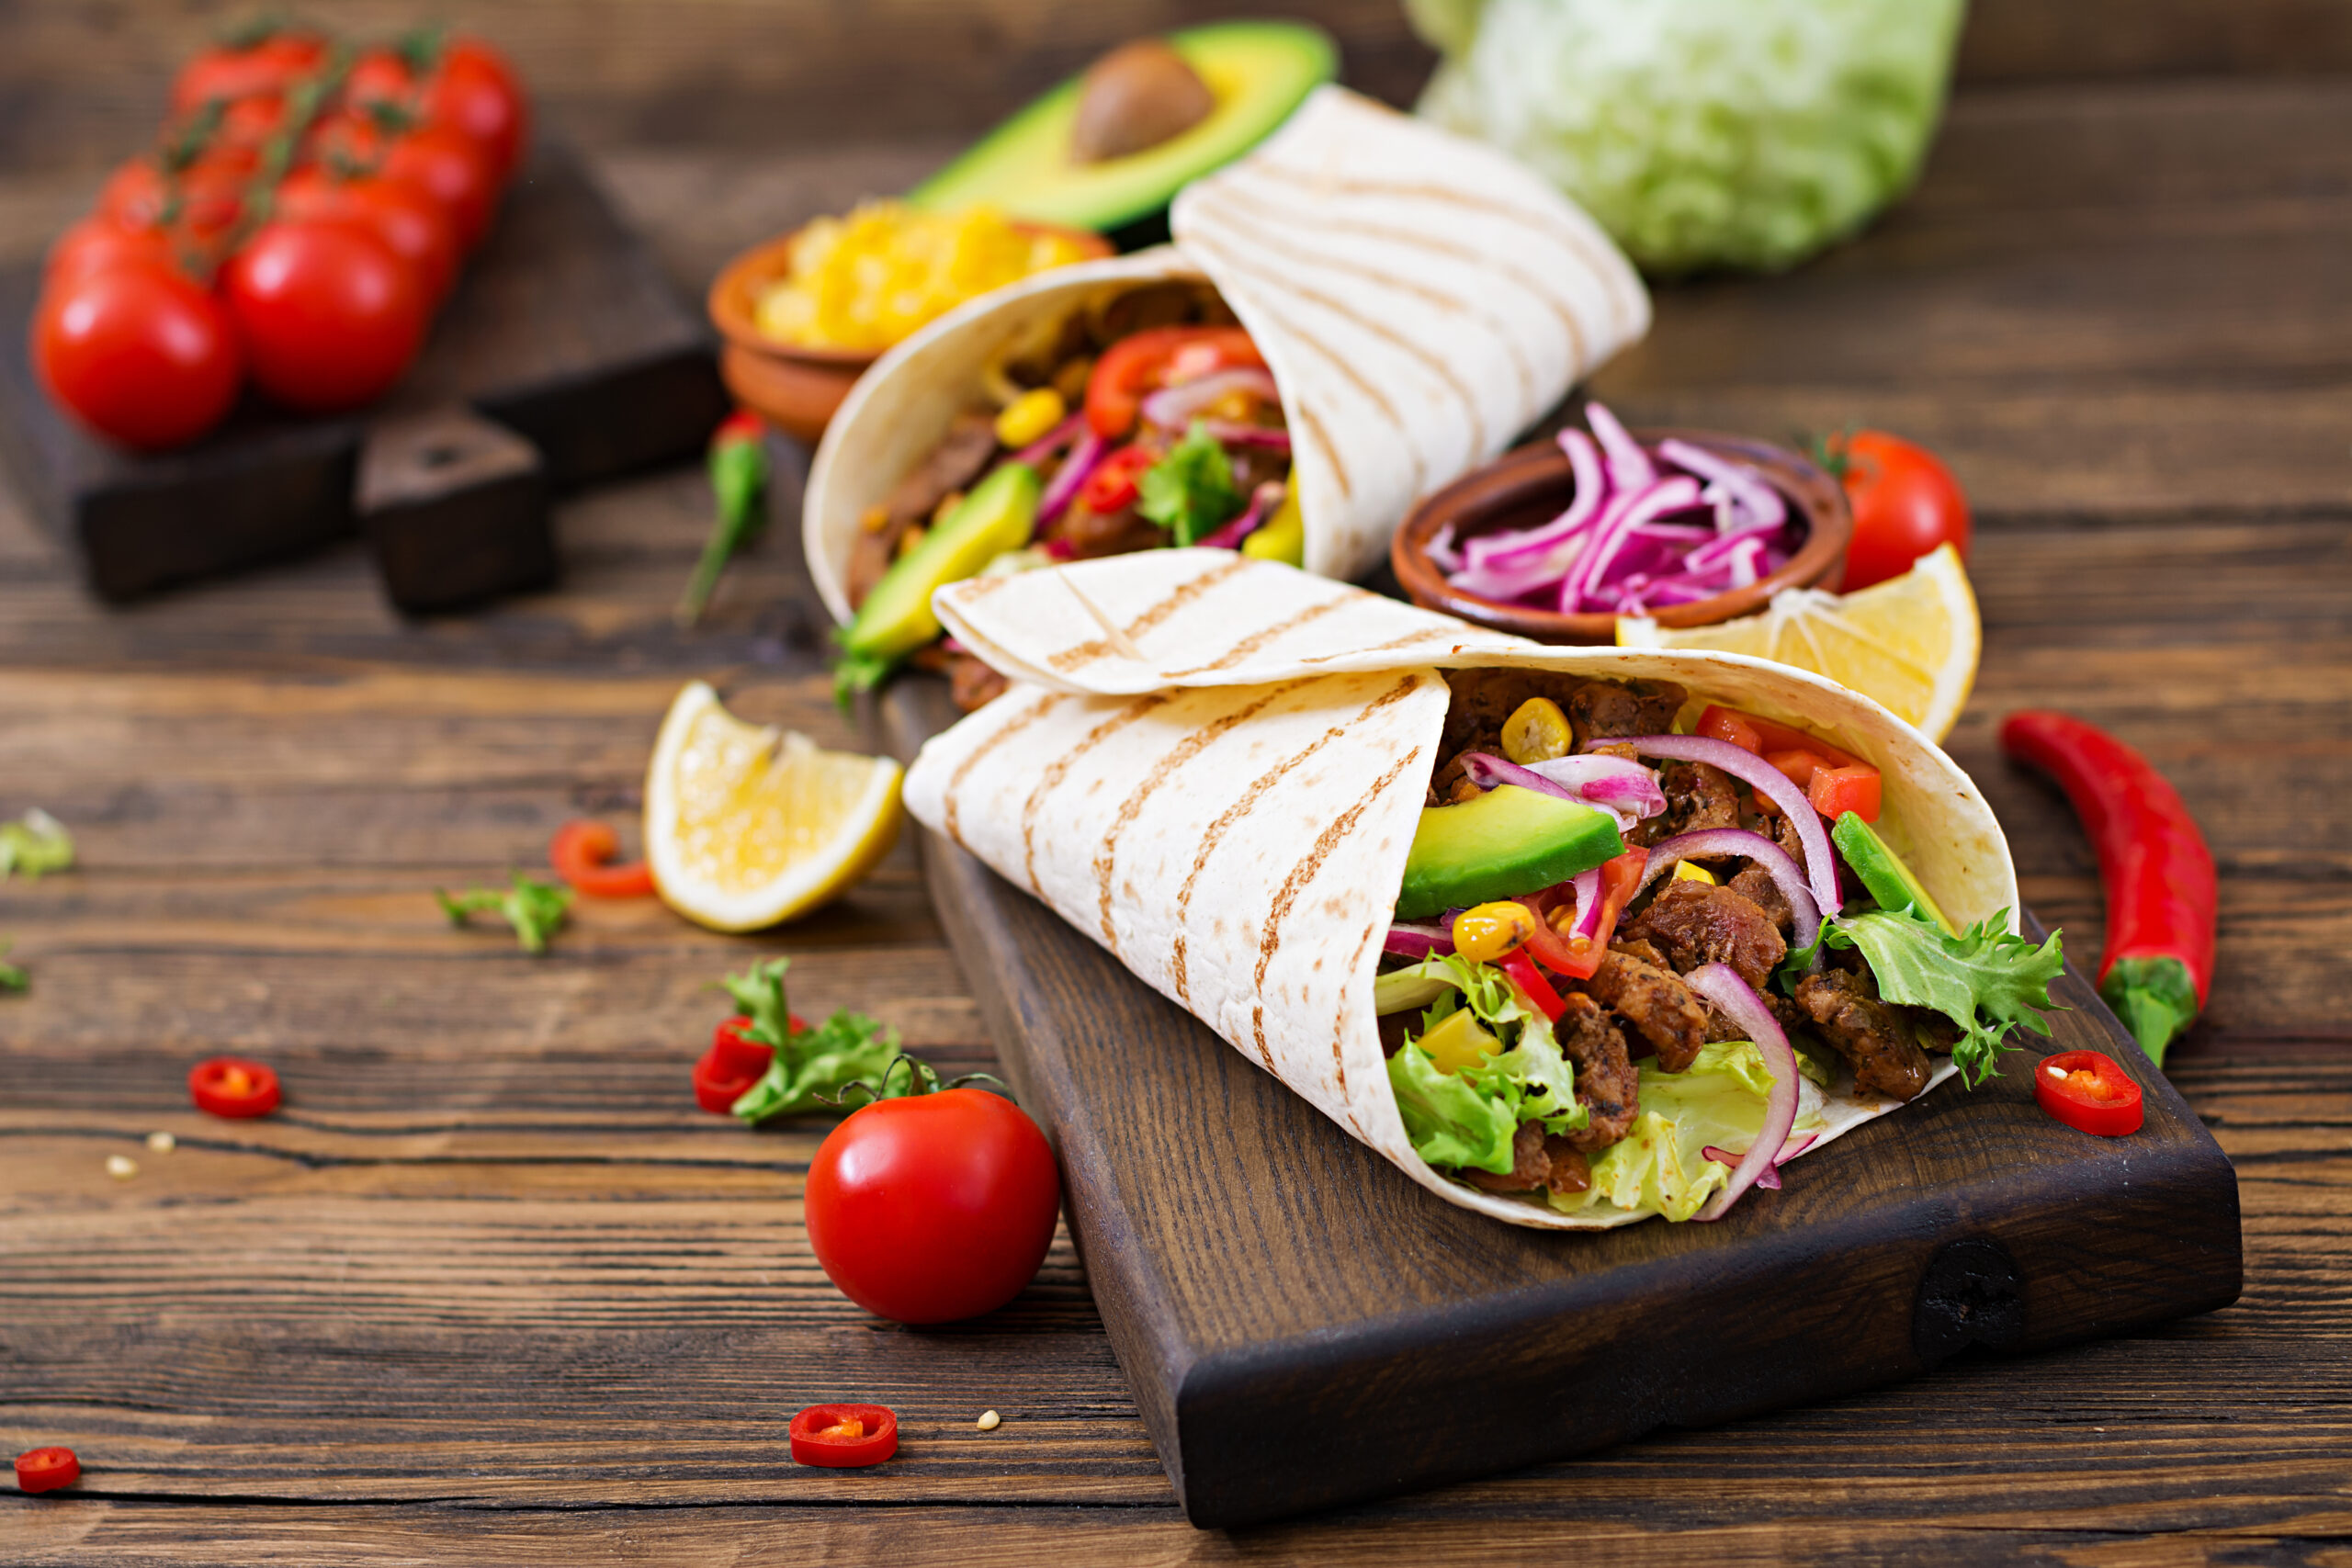 Celebrate Fajitas Day, every August 18th we commemorate this Tex-Mex dish.